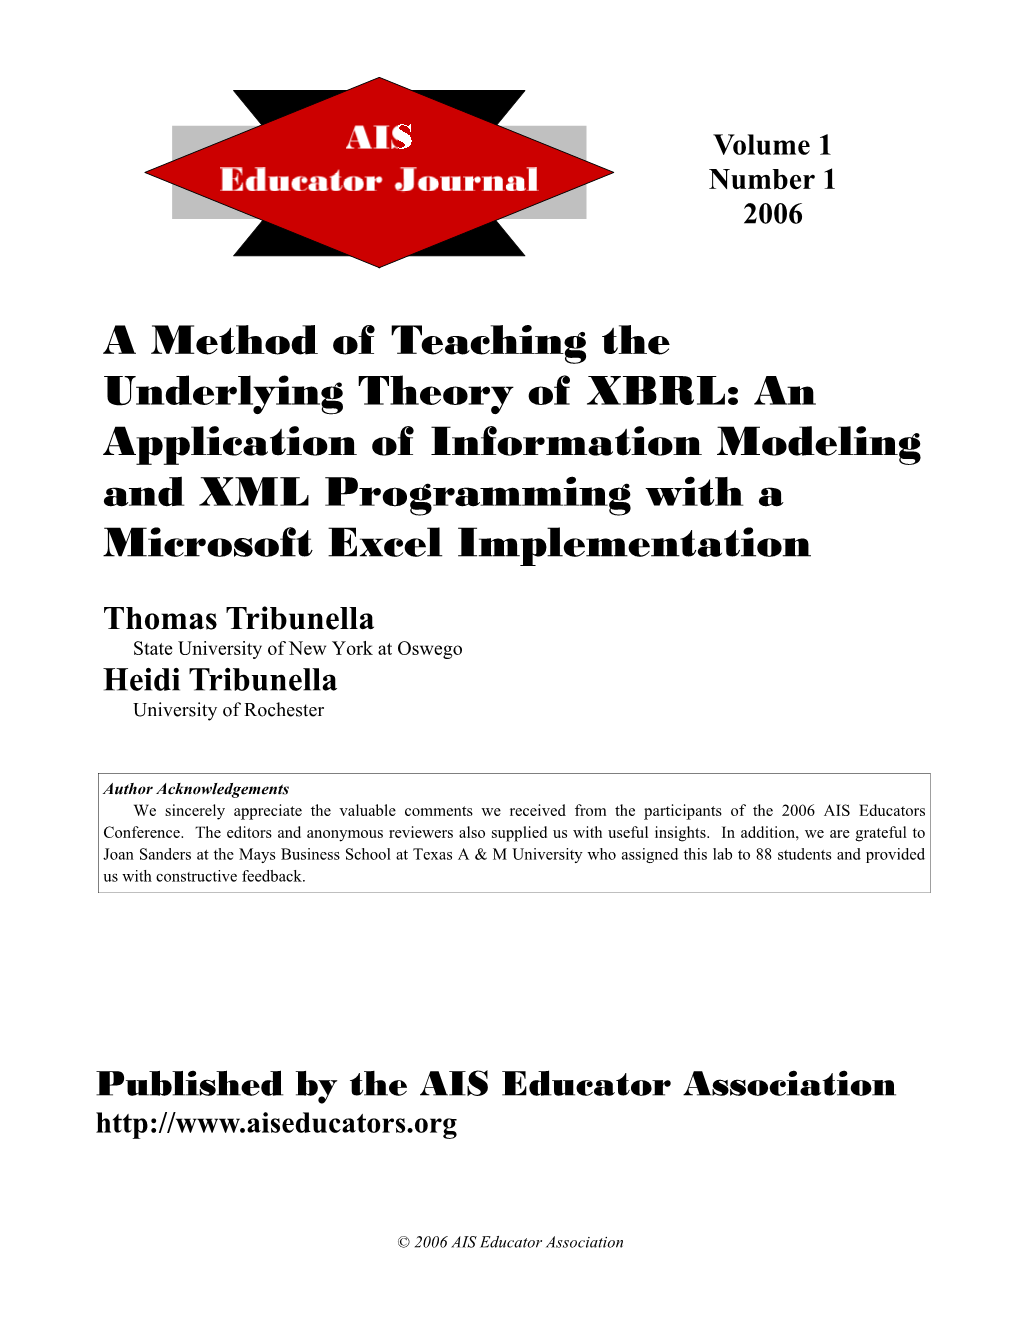 A Method of Teaching the Underlying Theory of XBRL: an Application of Information Modeling and XML Programming with a Microsoft Excel Implementation